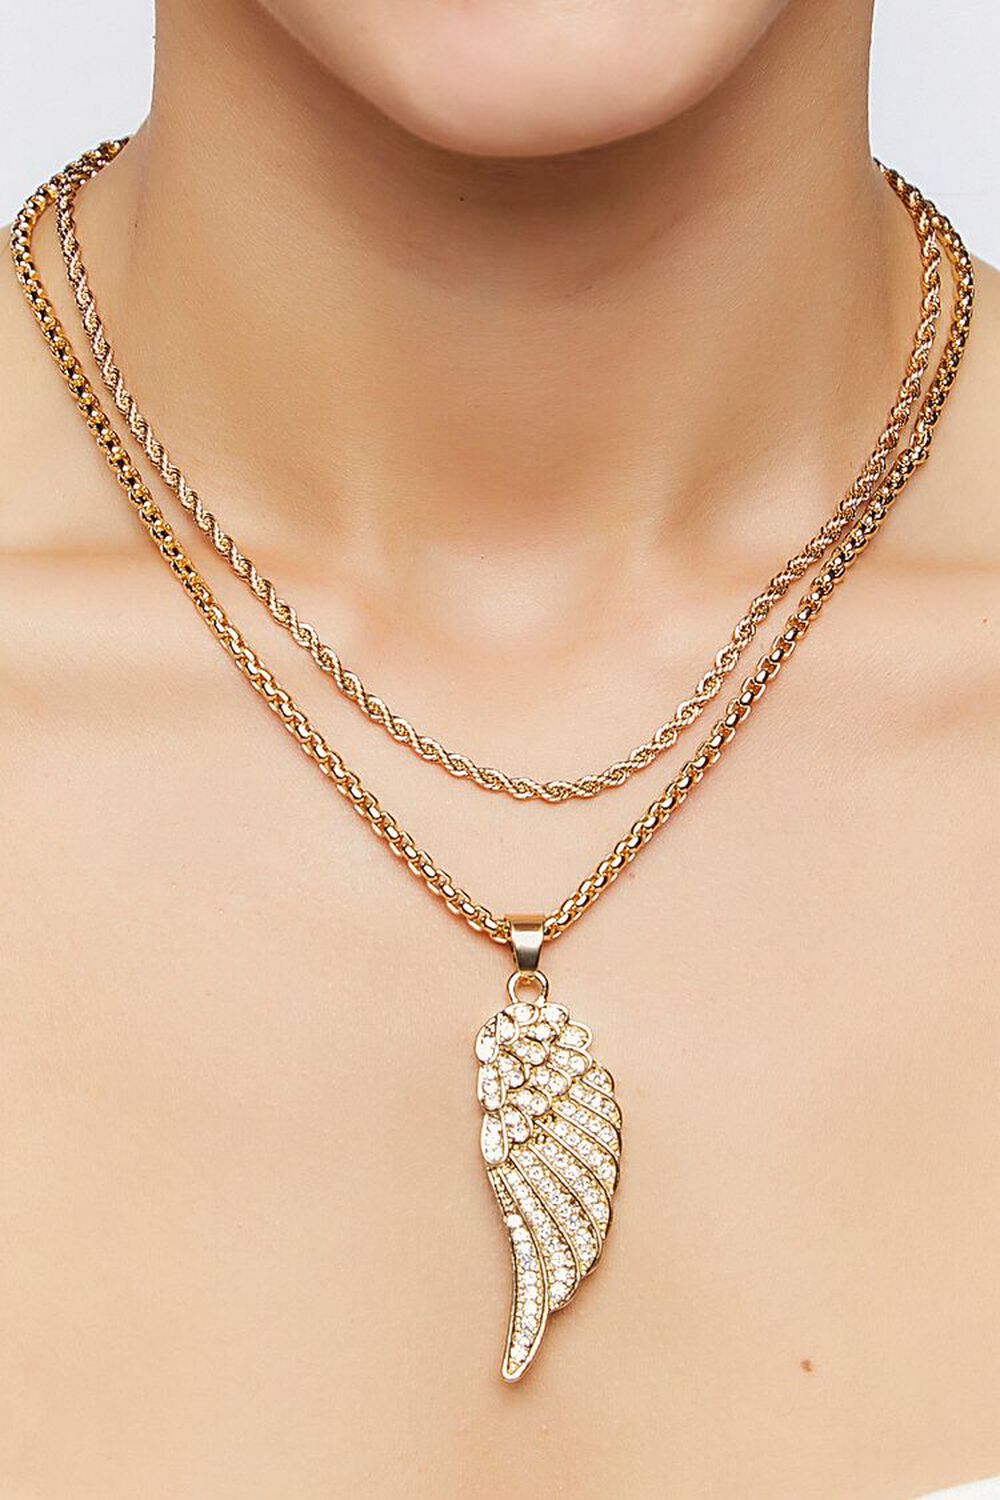 GOLD/CLEAR Wing Pendant Necklace Set, image 1